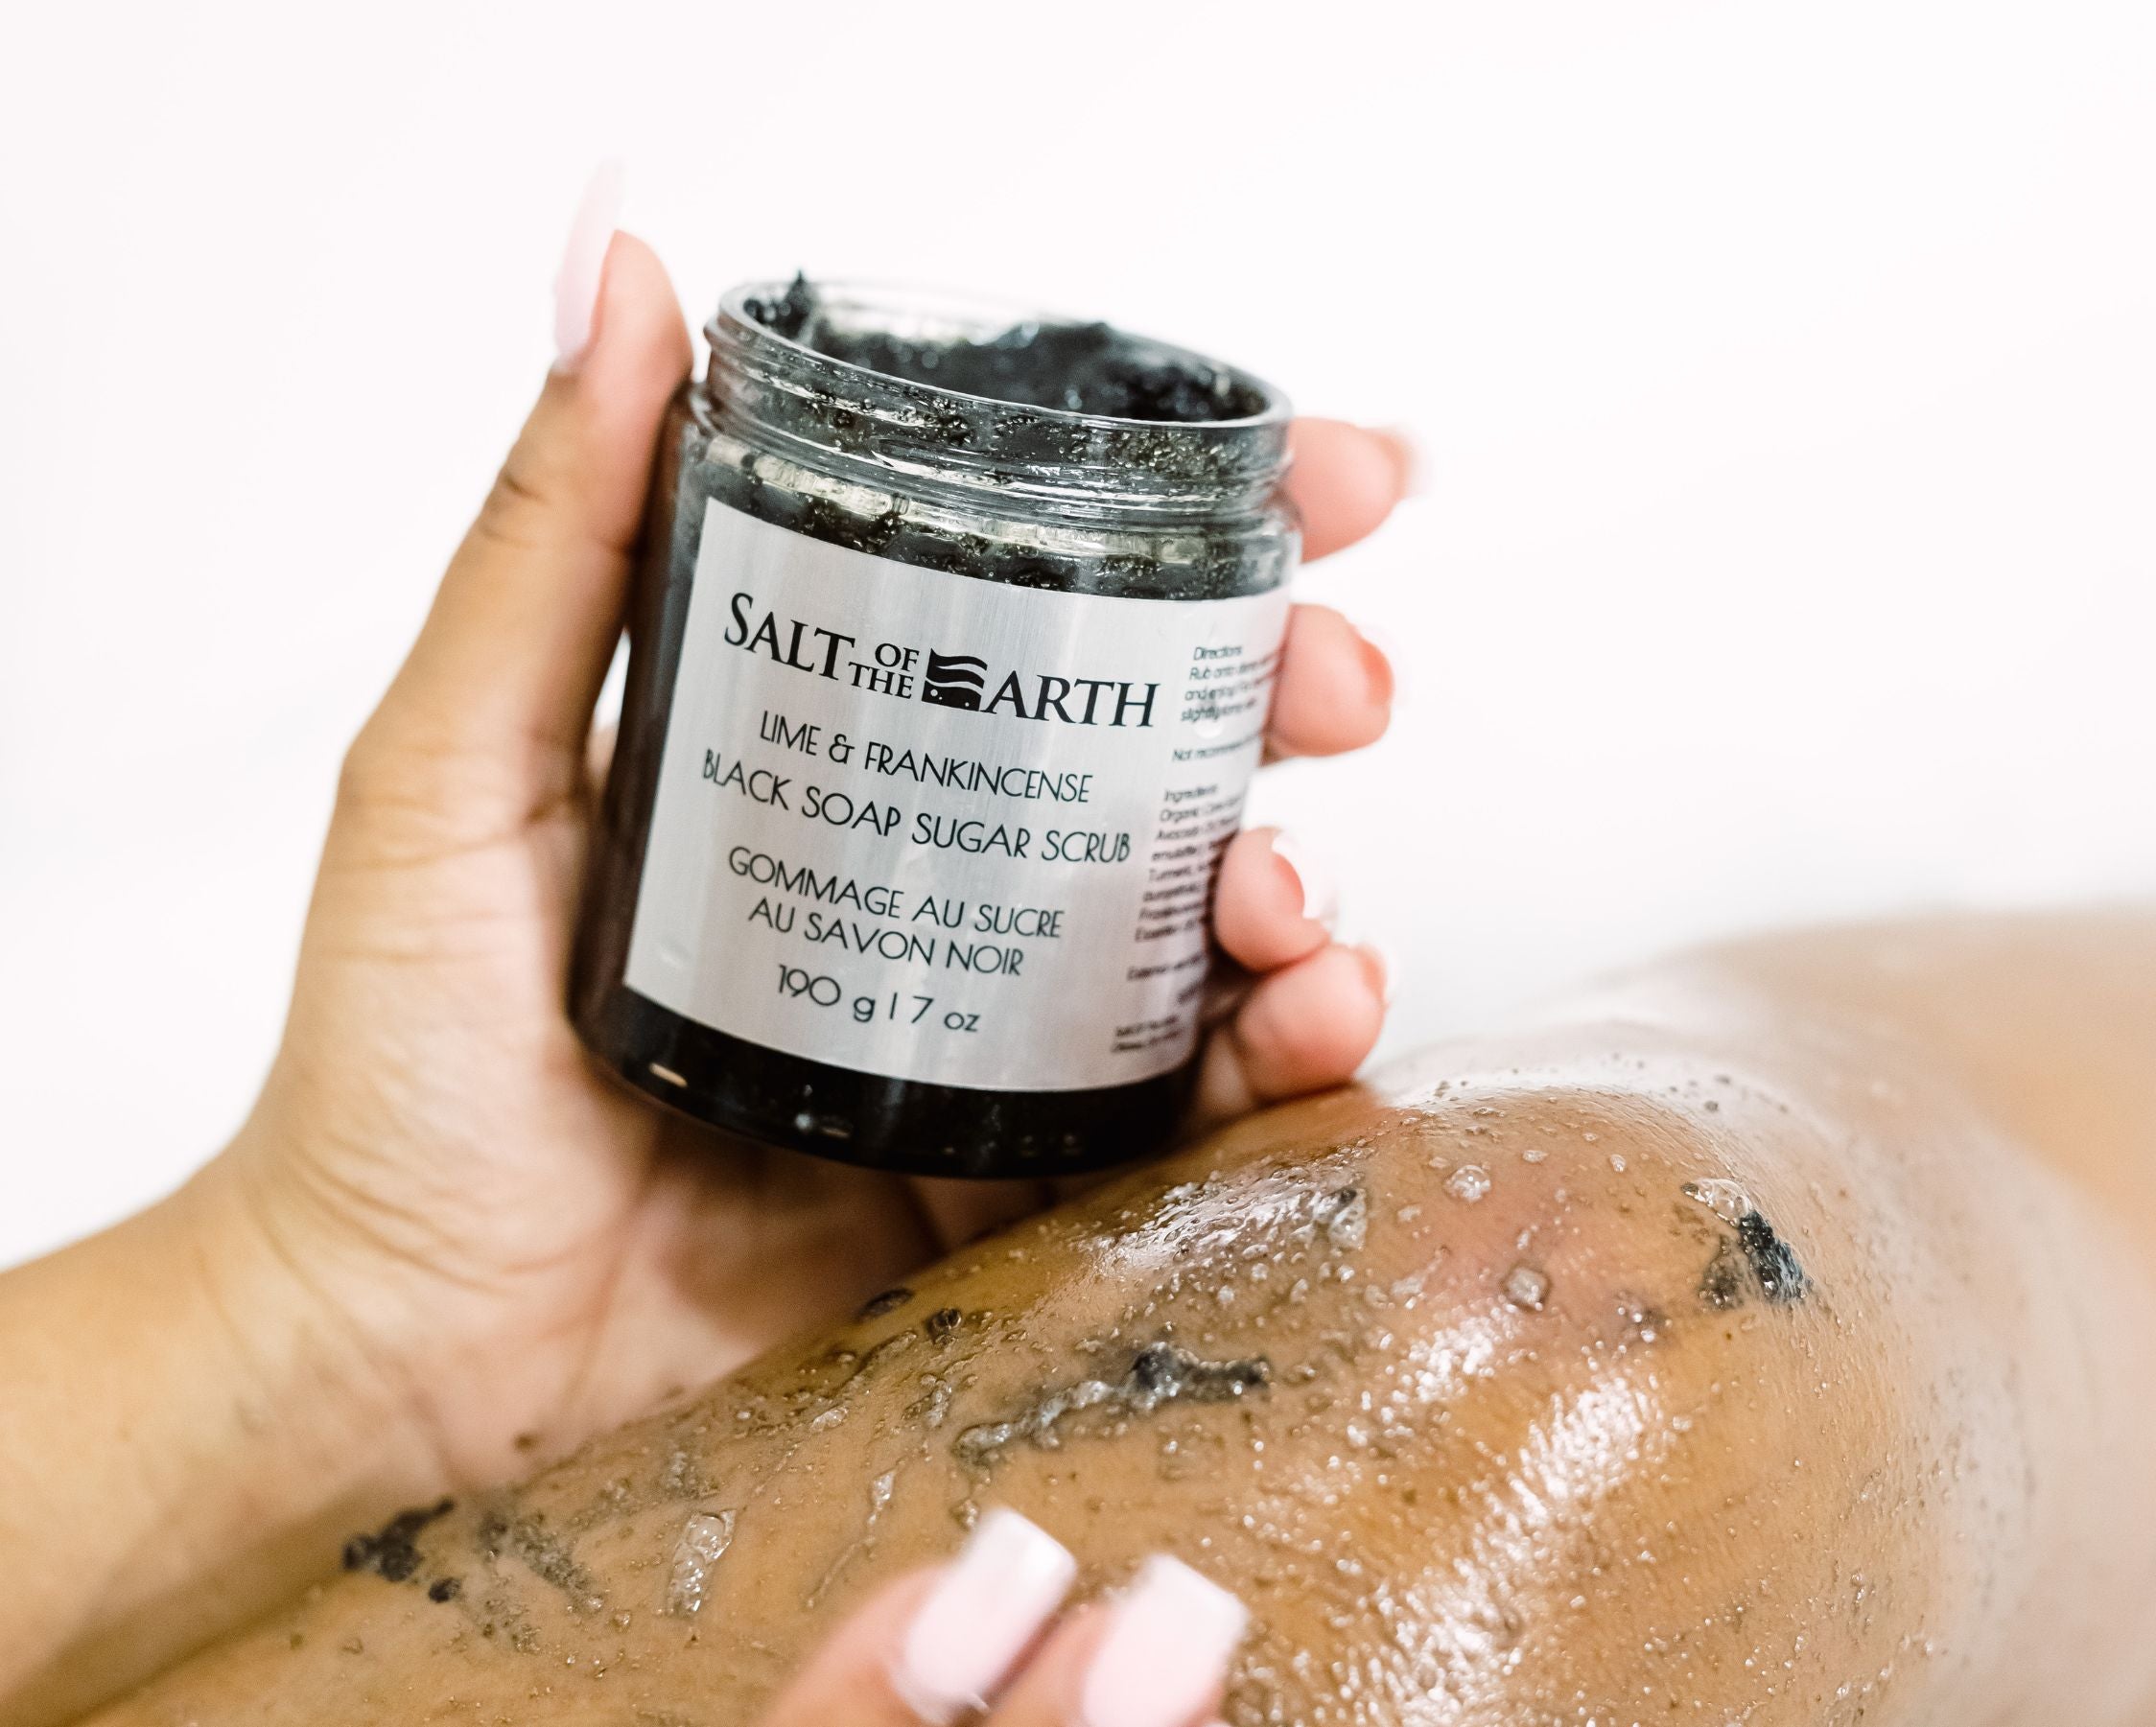 LIME & FRANKINCENSE BLACK SOAP SUGAR SCRUB | TURMERIC ENRICHED SCRUB FOR BODY ACNE AND POST SHAVE CARE - SALT OF THE EARTH